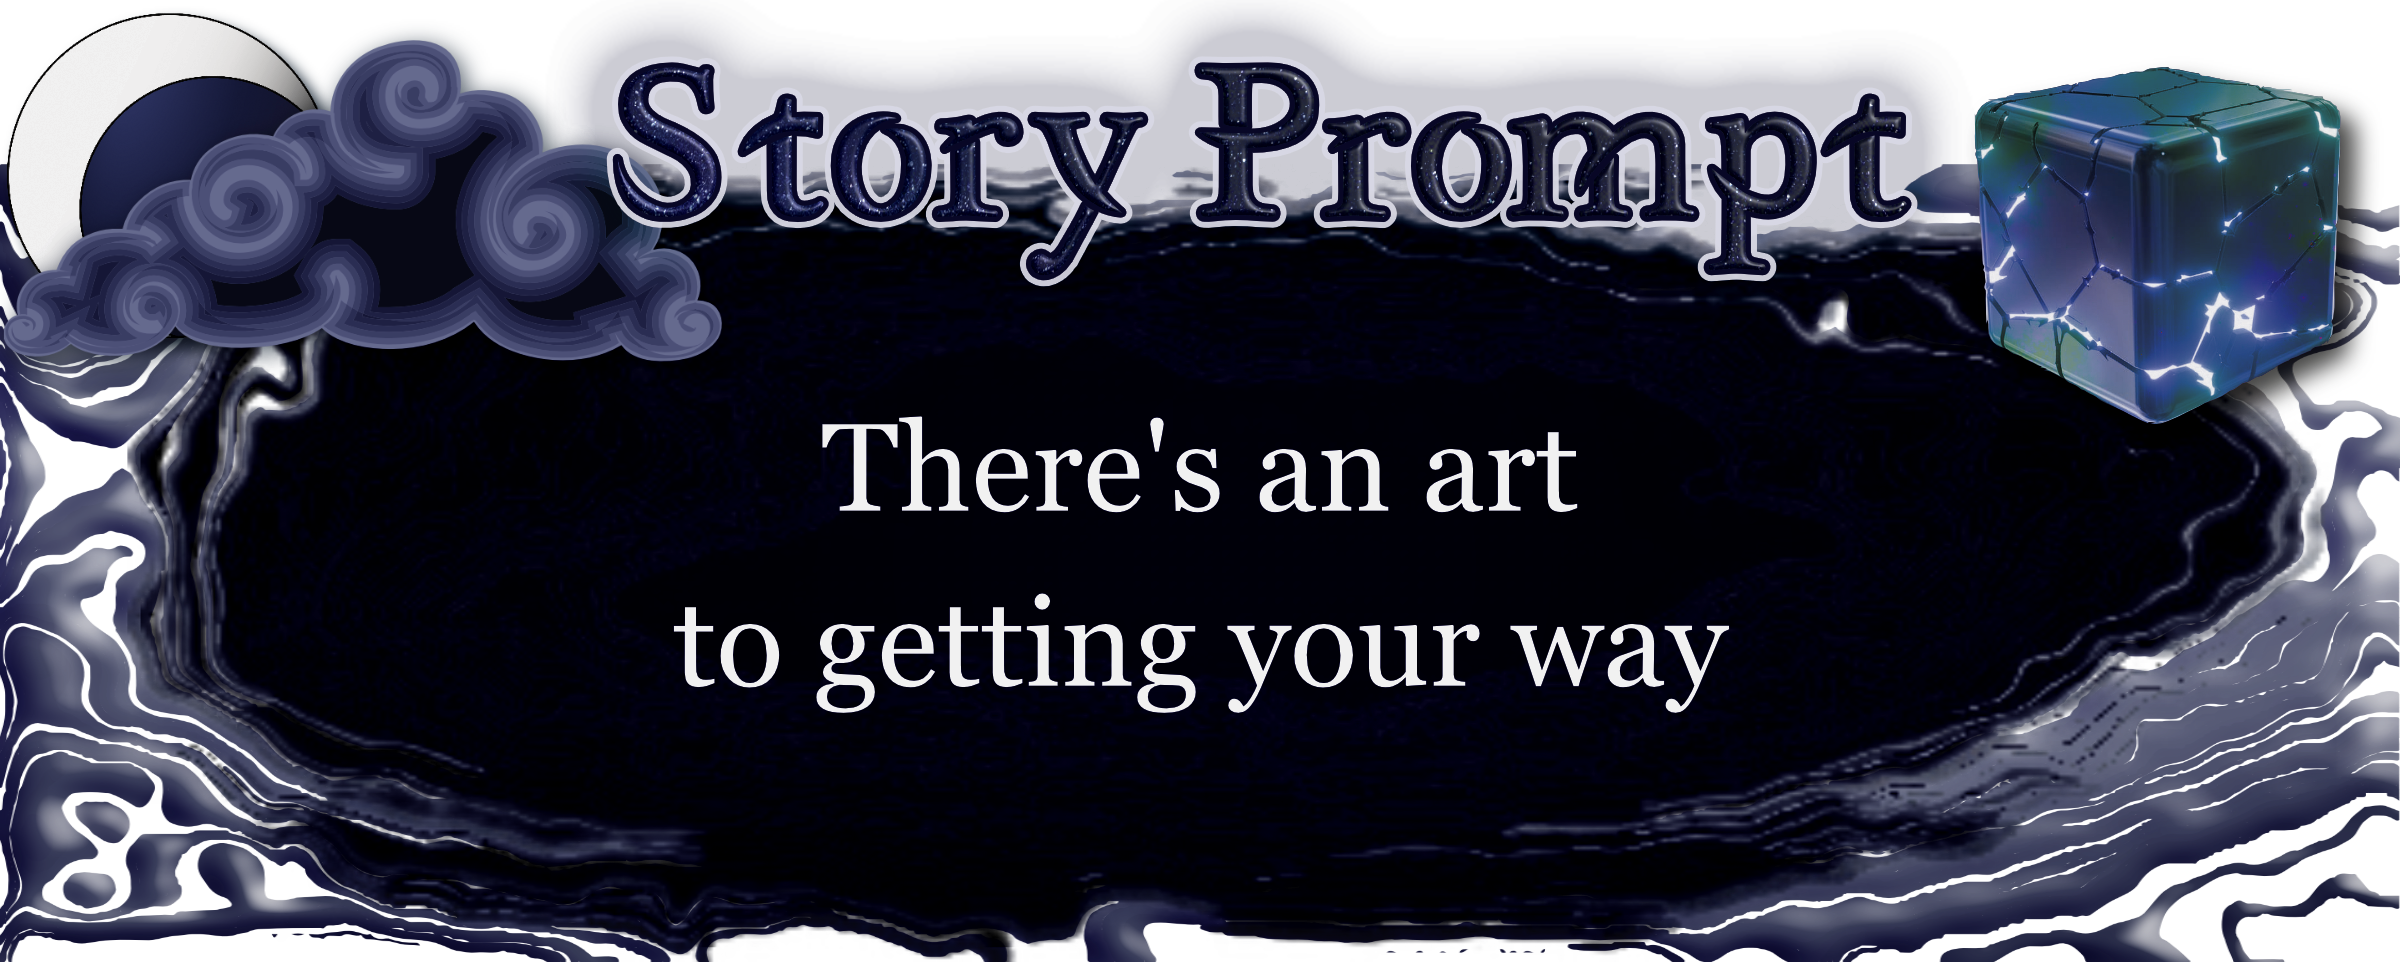 Author Jenna Eatough's Flash Fiction Story from writing prompt: There's an art ot getting your way